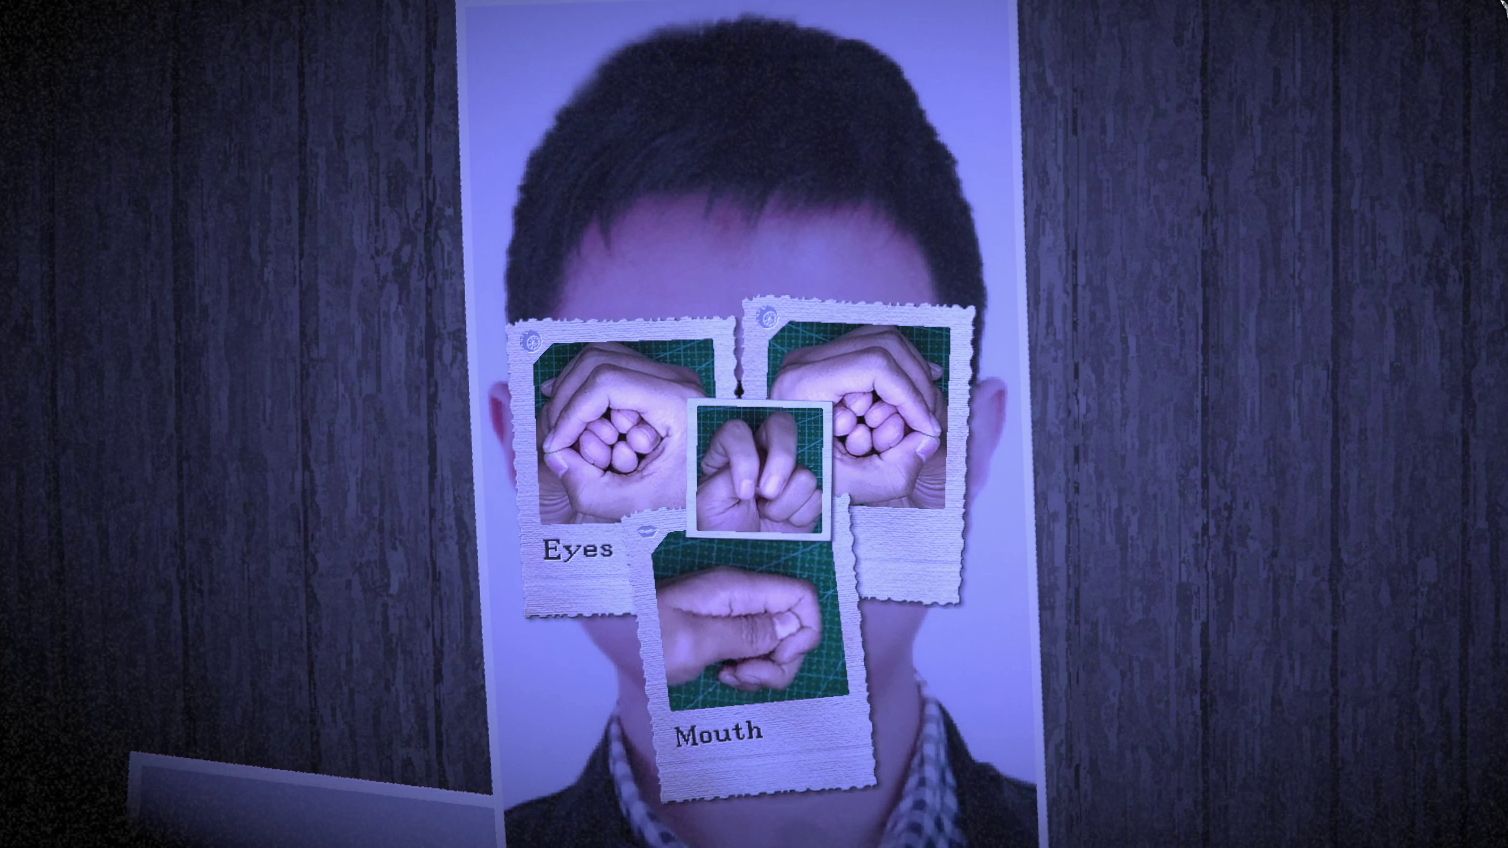 A face where the main features are formed of polaroid photos of hands in different positions, from the title screen of Out Of Hands